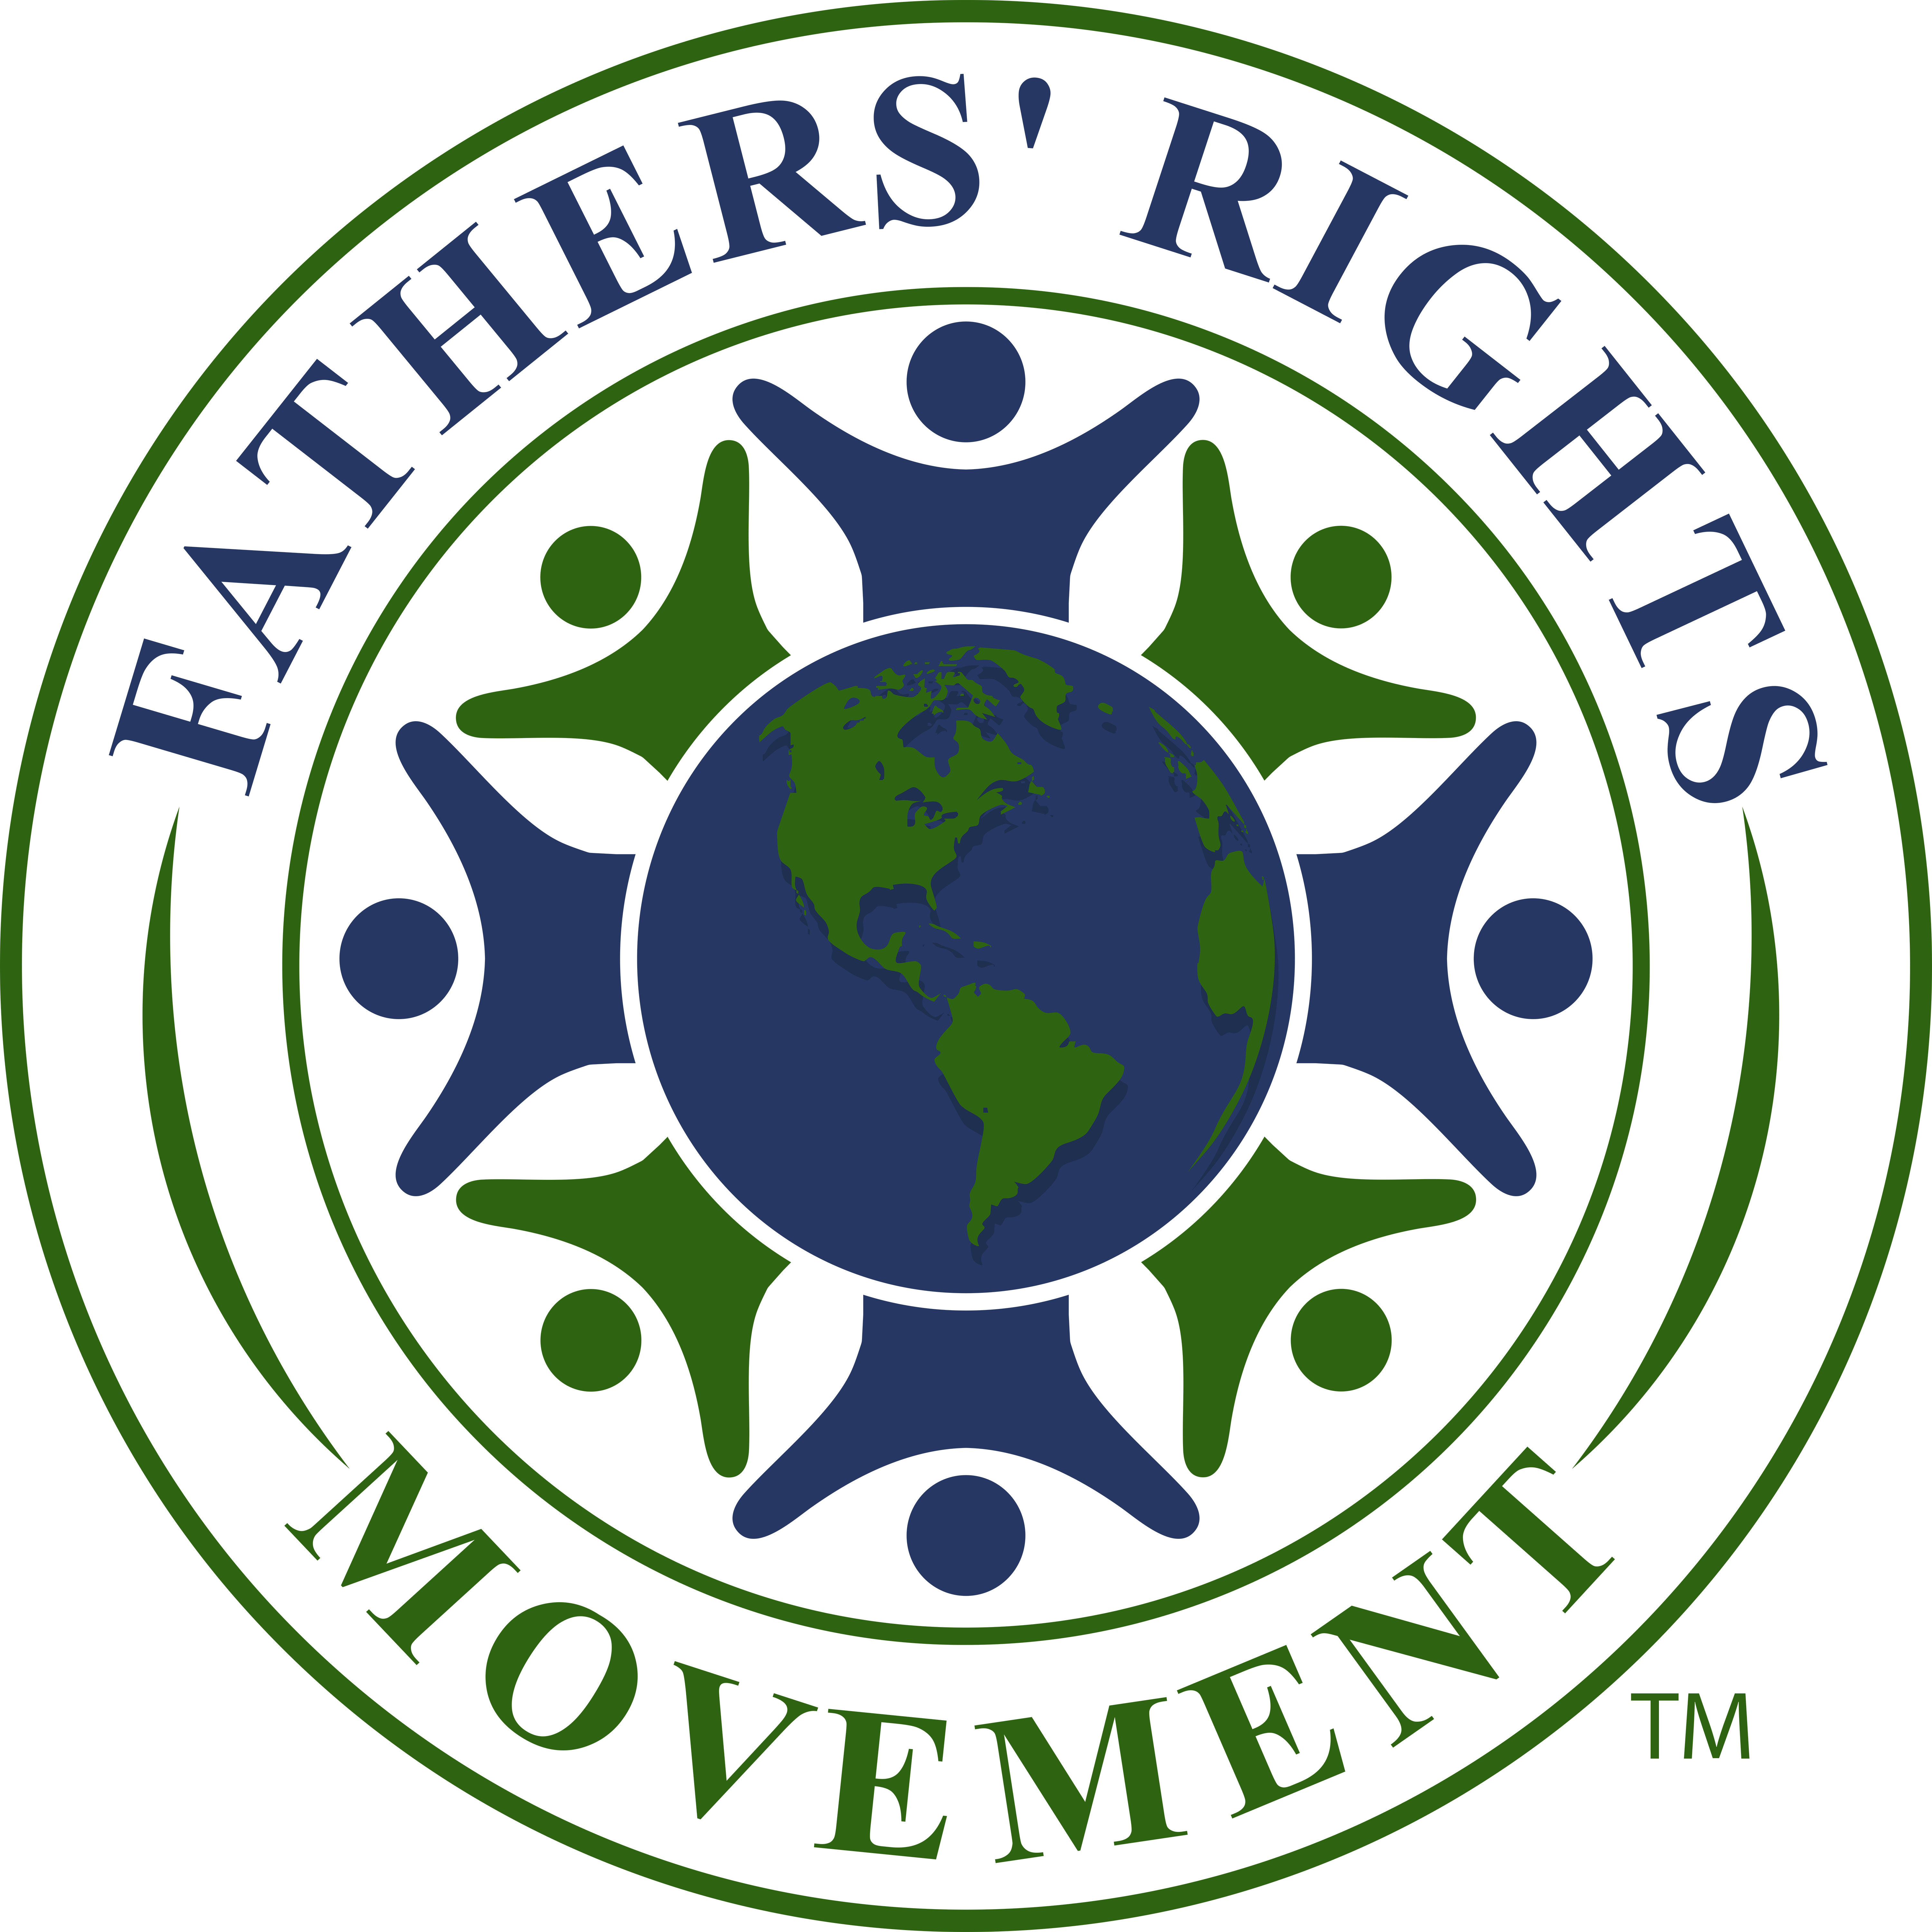 Movement Logo - Logo - The Fathers' Rights Movement